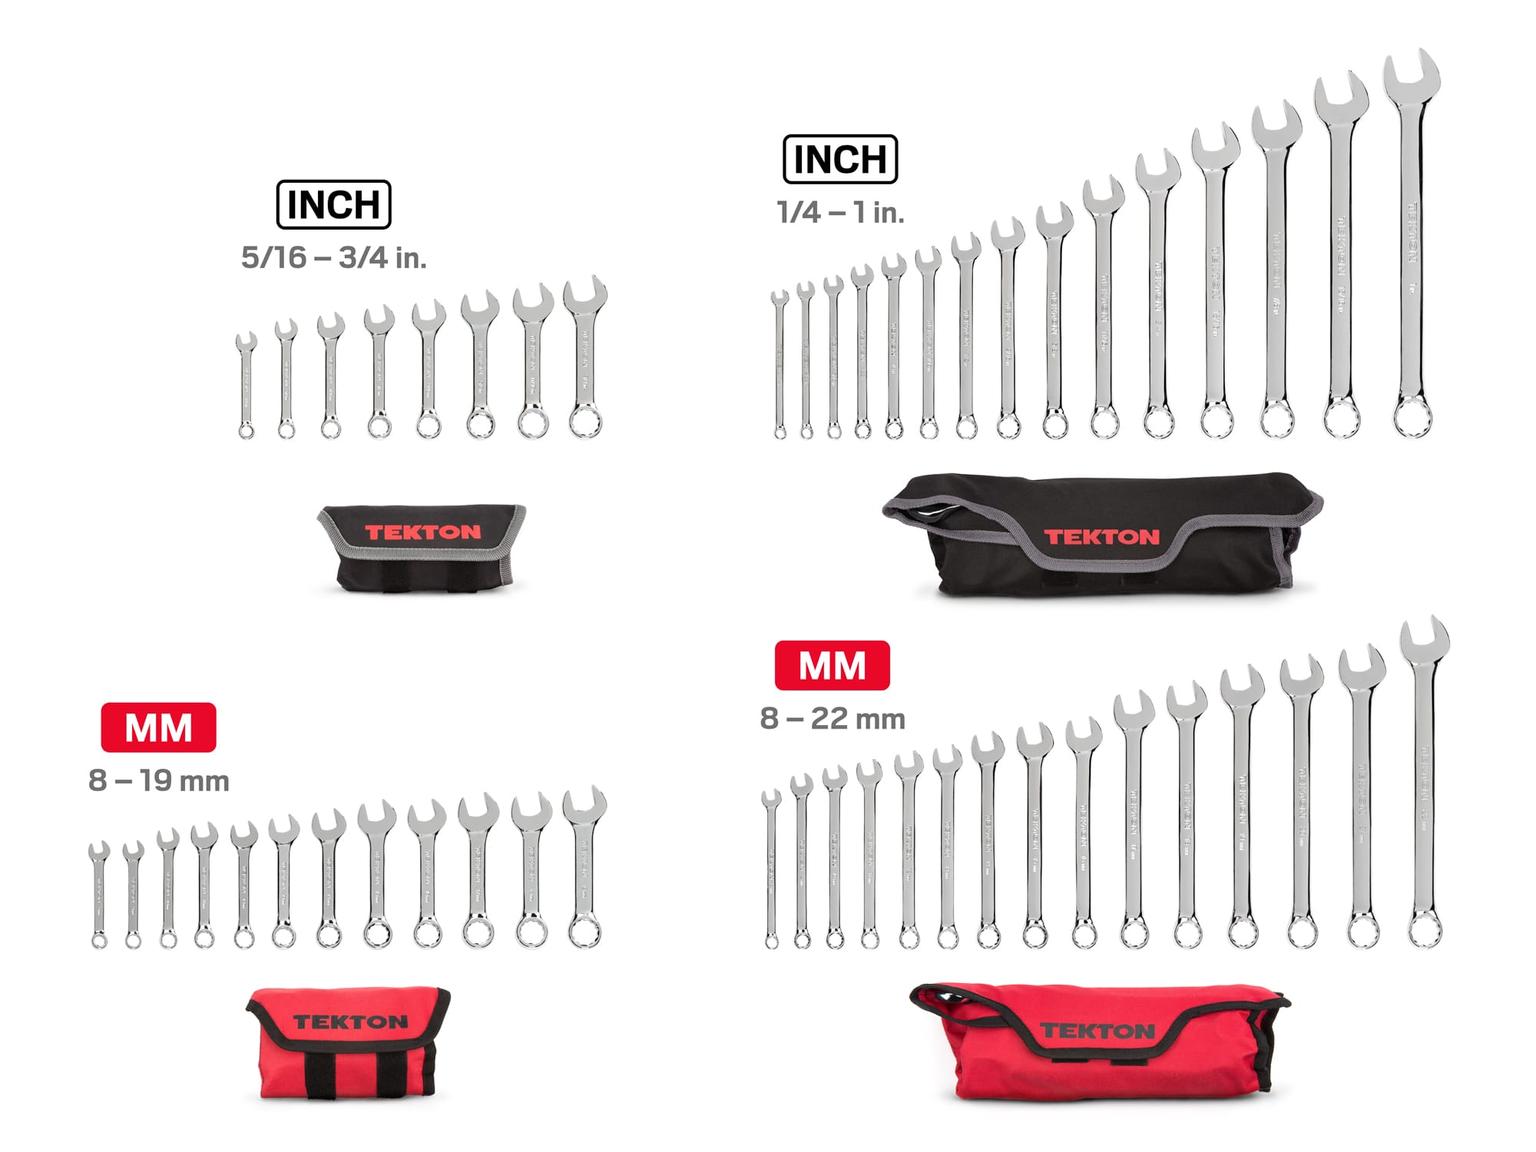 TEKTON WCB94901-T Stubby and Standard Length Combination Wrench Set with Pouch, 50-Piece (1/4-1 in., 8-22 mm)